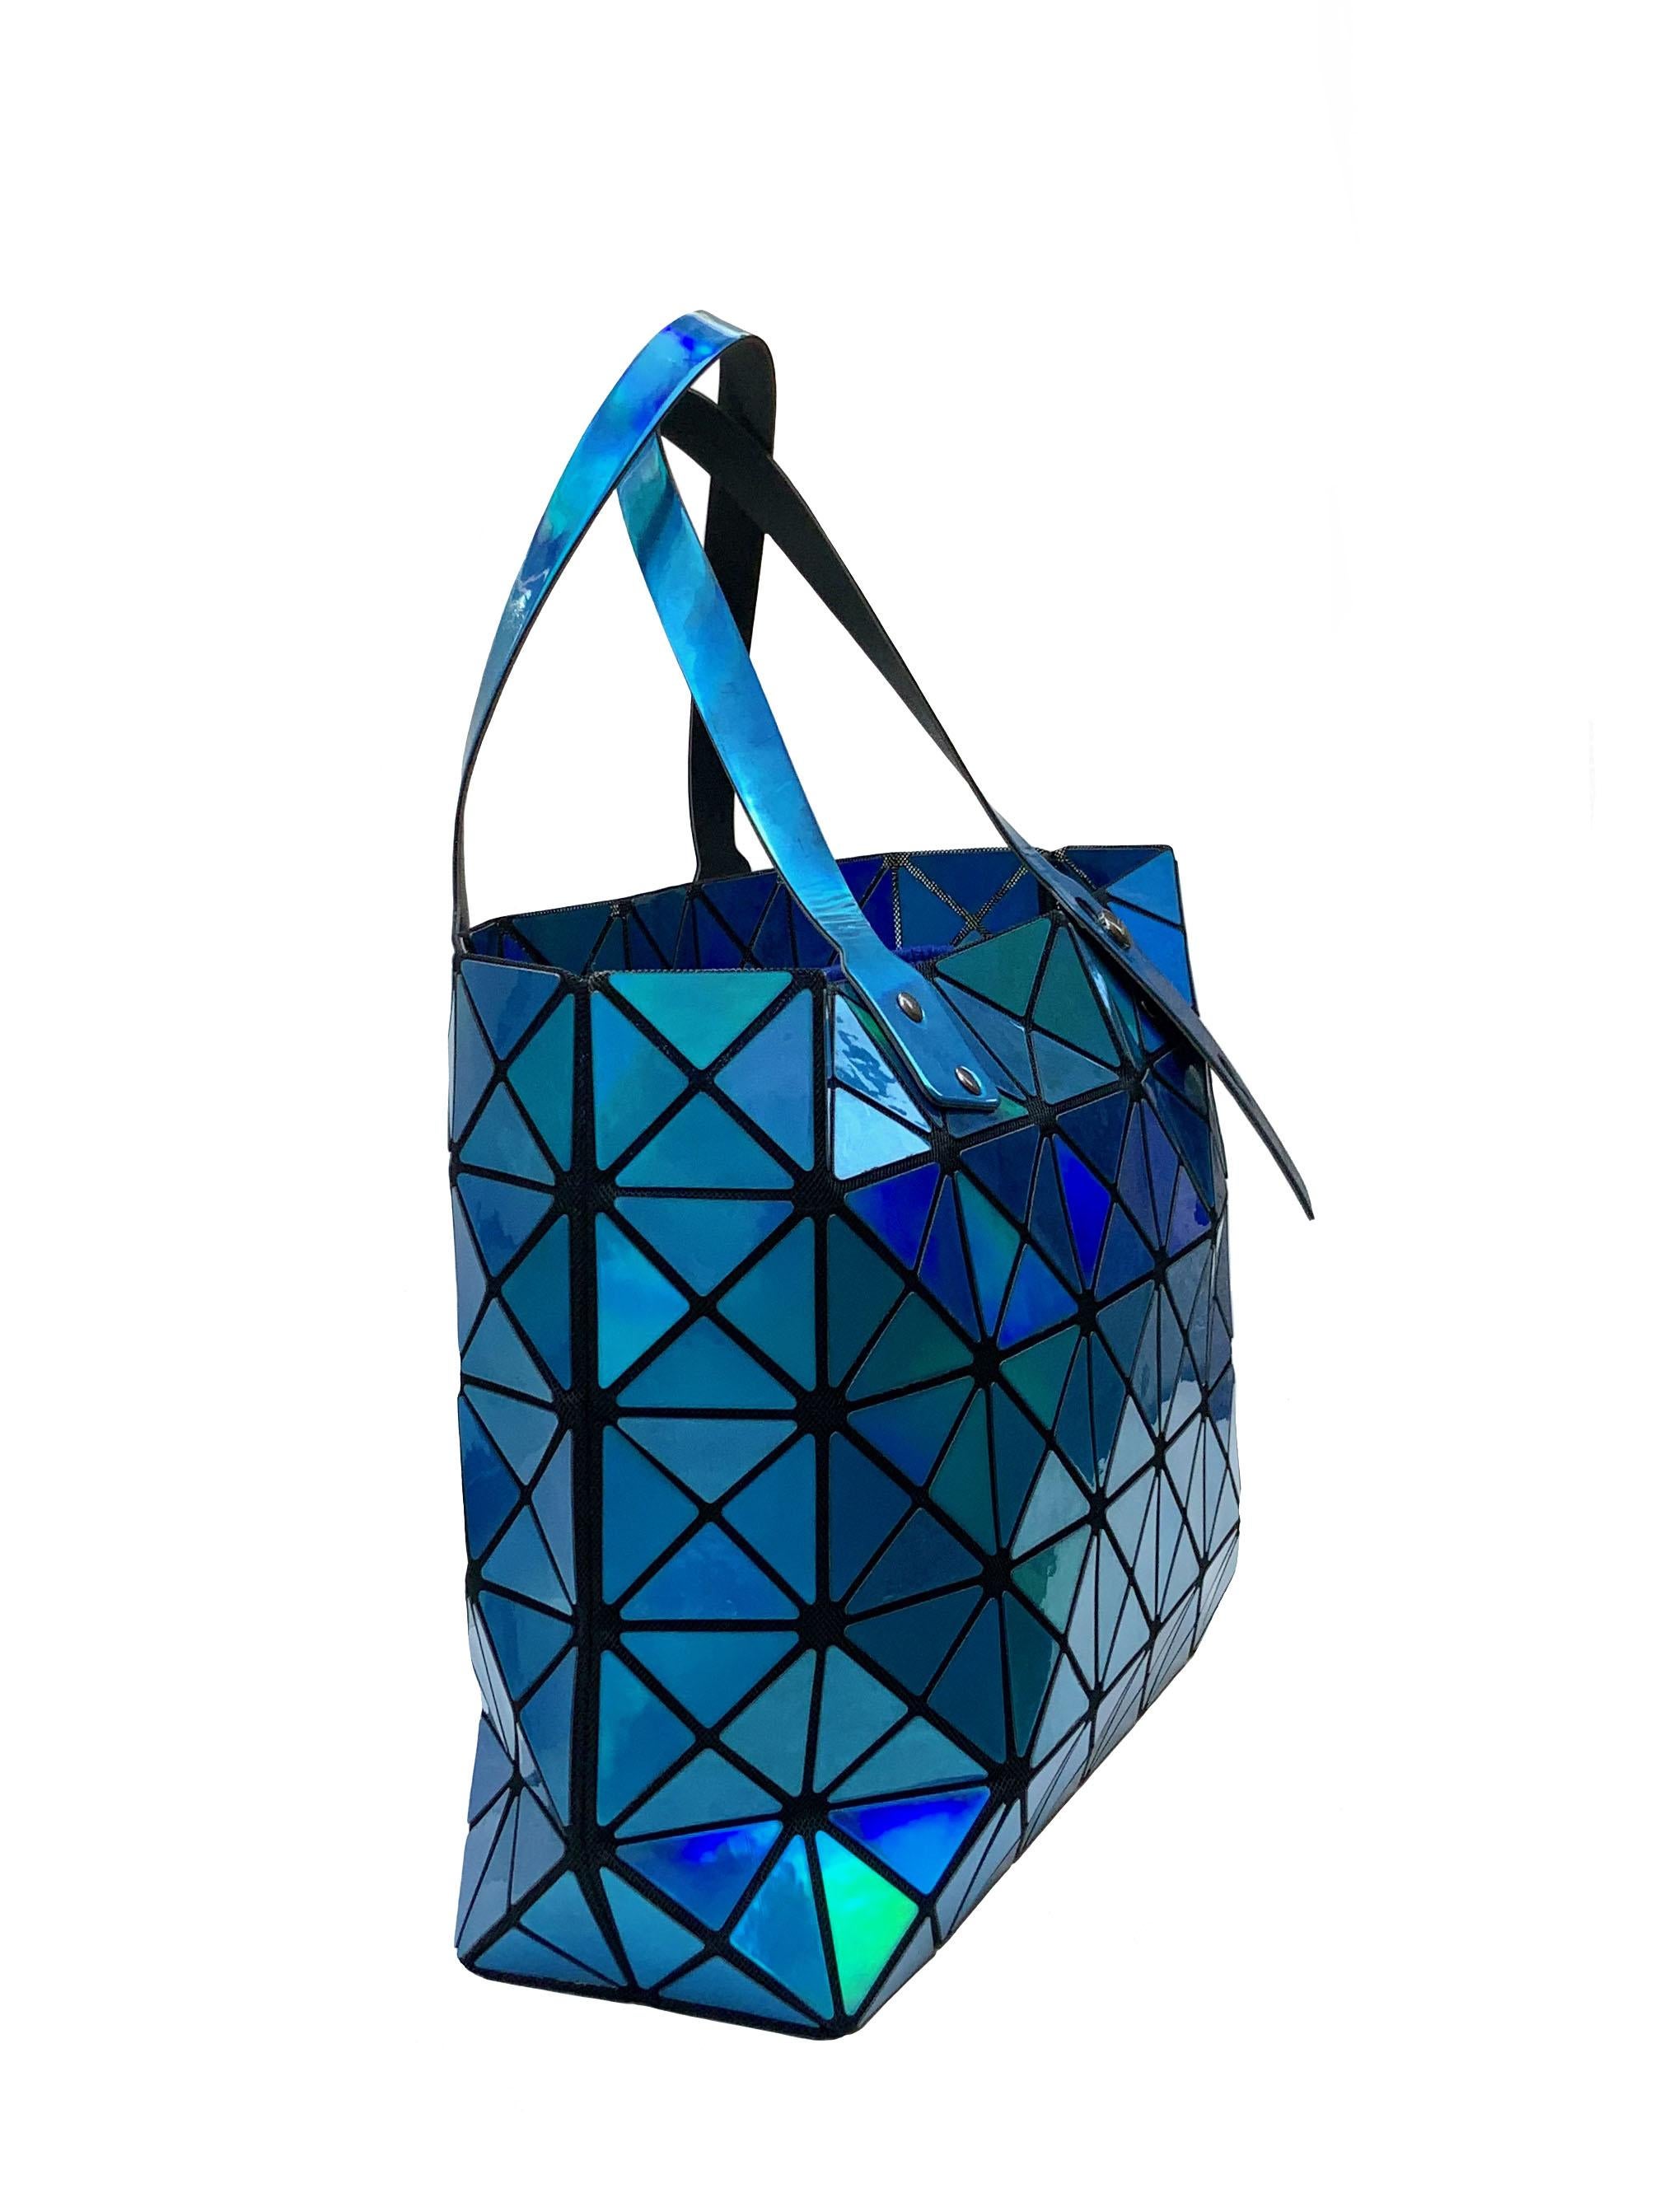 This pre-owned Bao Bao bag from Issey Miyake is a classic signature from the japanese brand. Triangular tiles, inside black mesh, adjustable top handles.

Material: PVC
Lining: Microfiber
Color: Blue
Measurements: 43 cms x 26 cms x 11 cms - Approx.